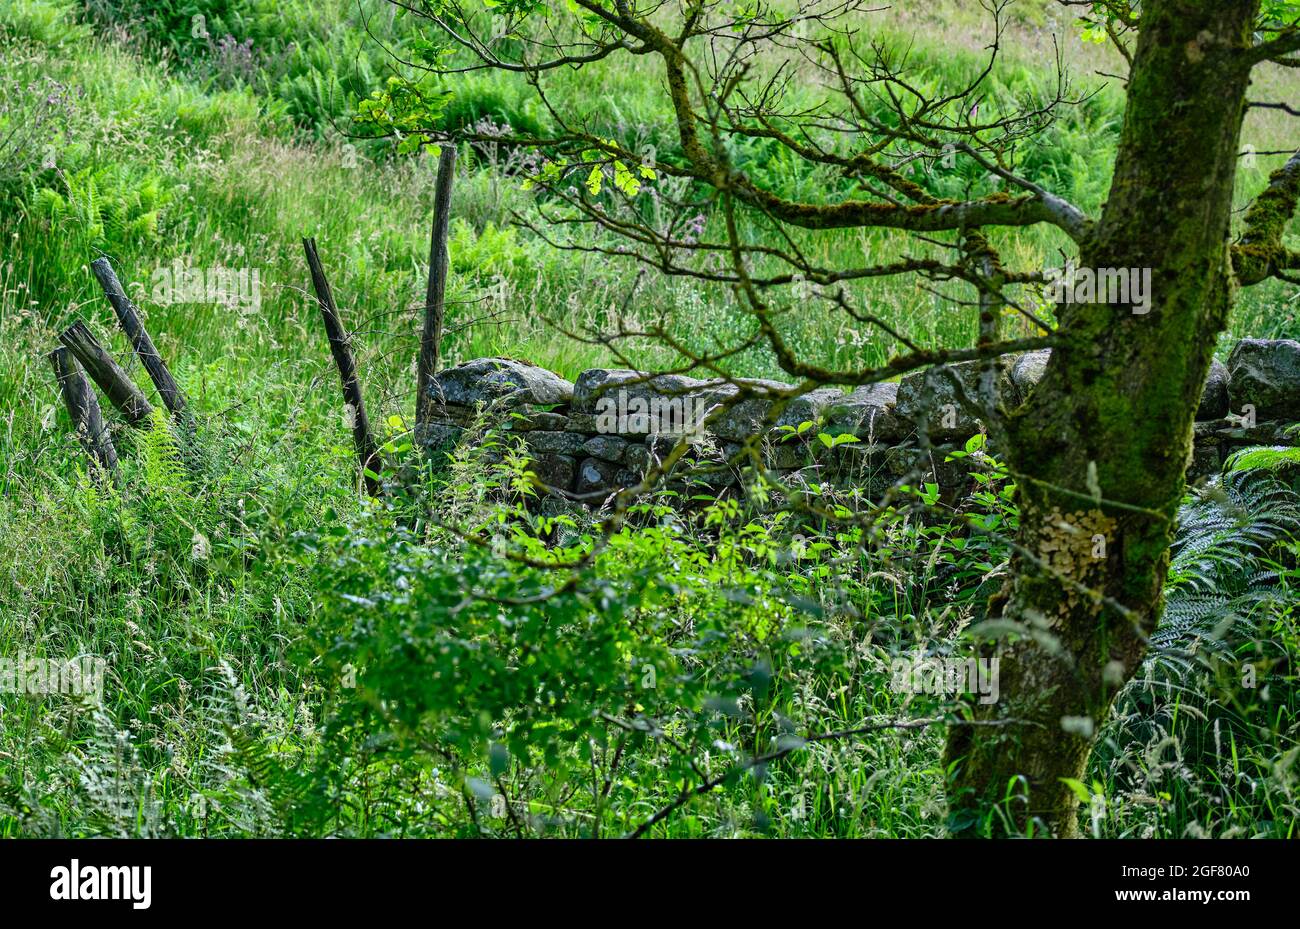 Broken fencing by drystone wall in Yorkshire Dales Stock Photo